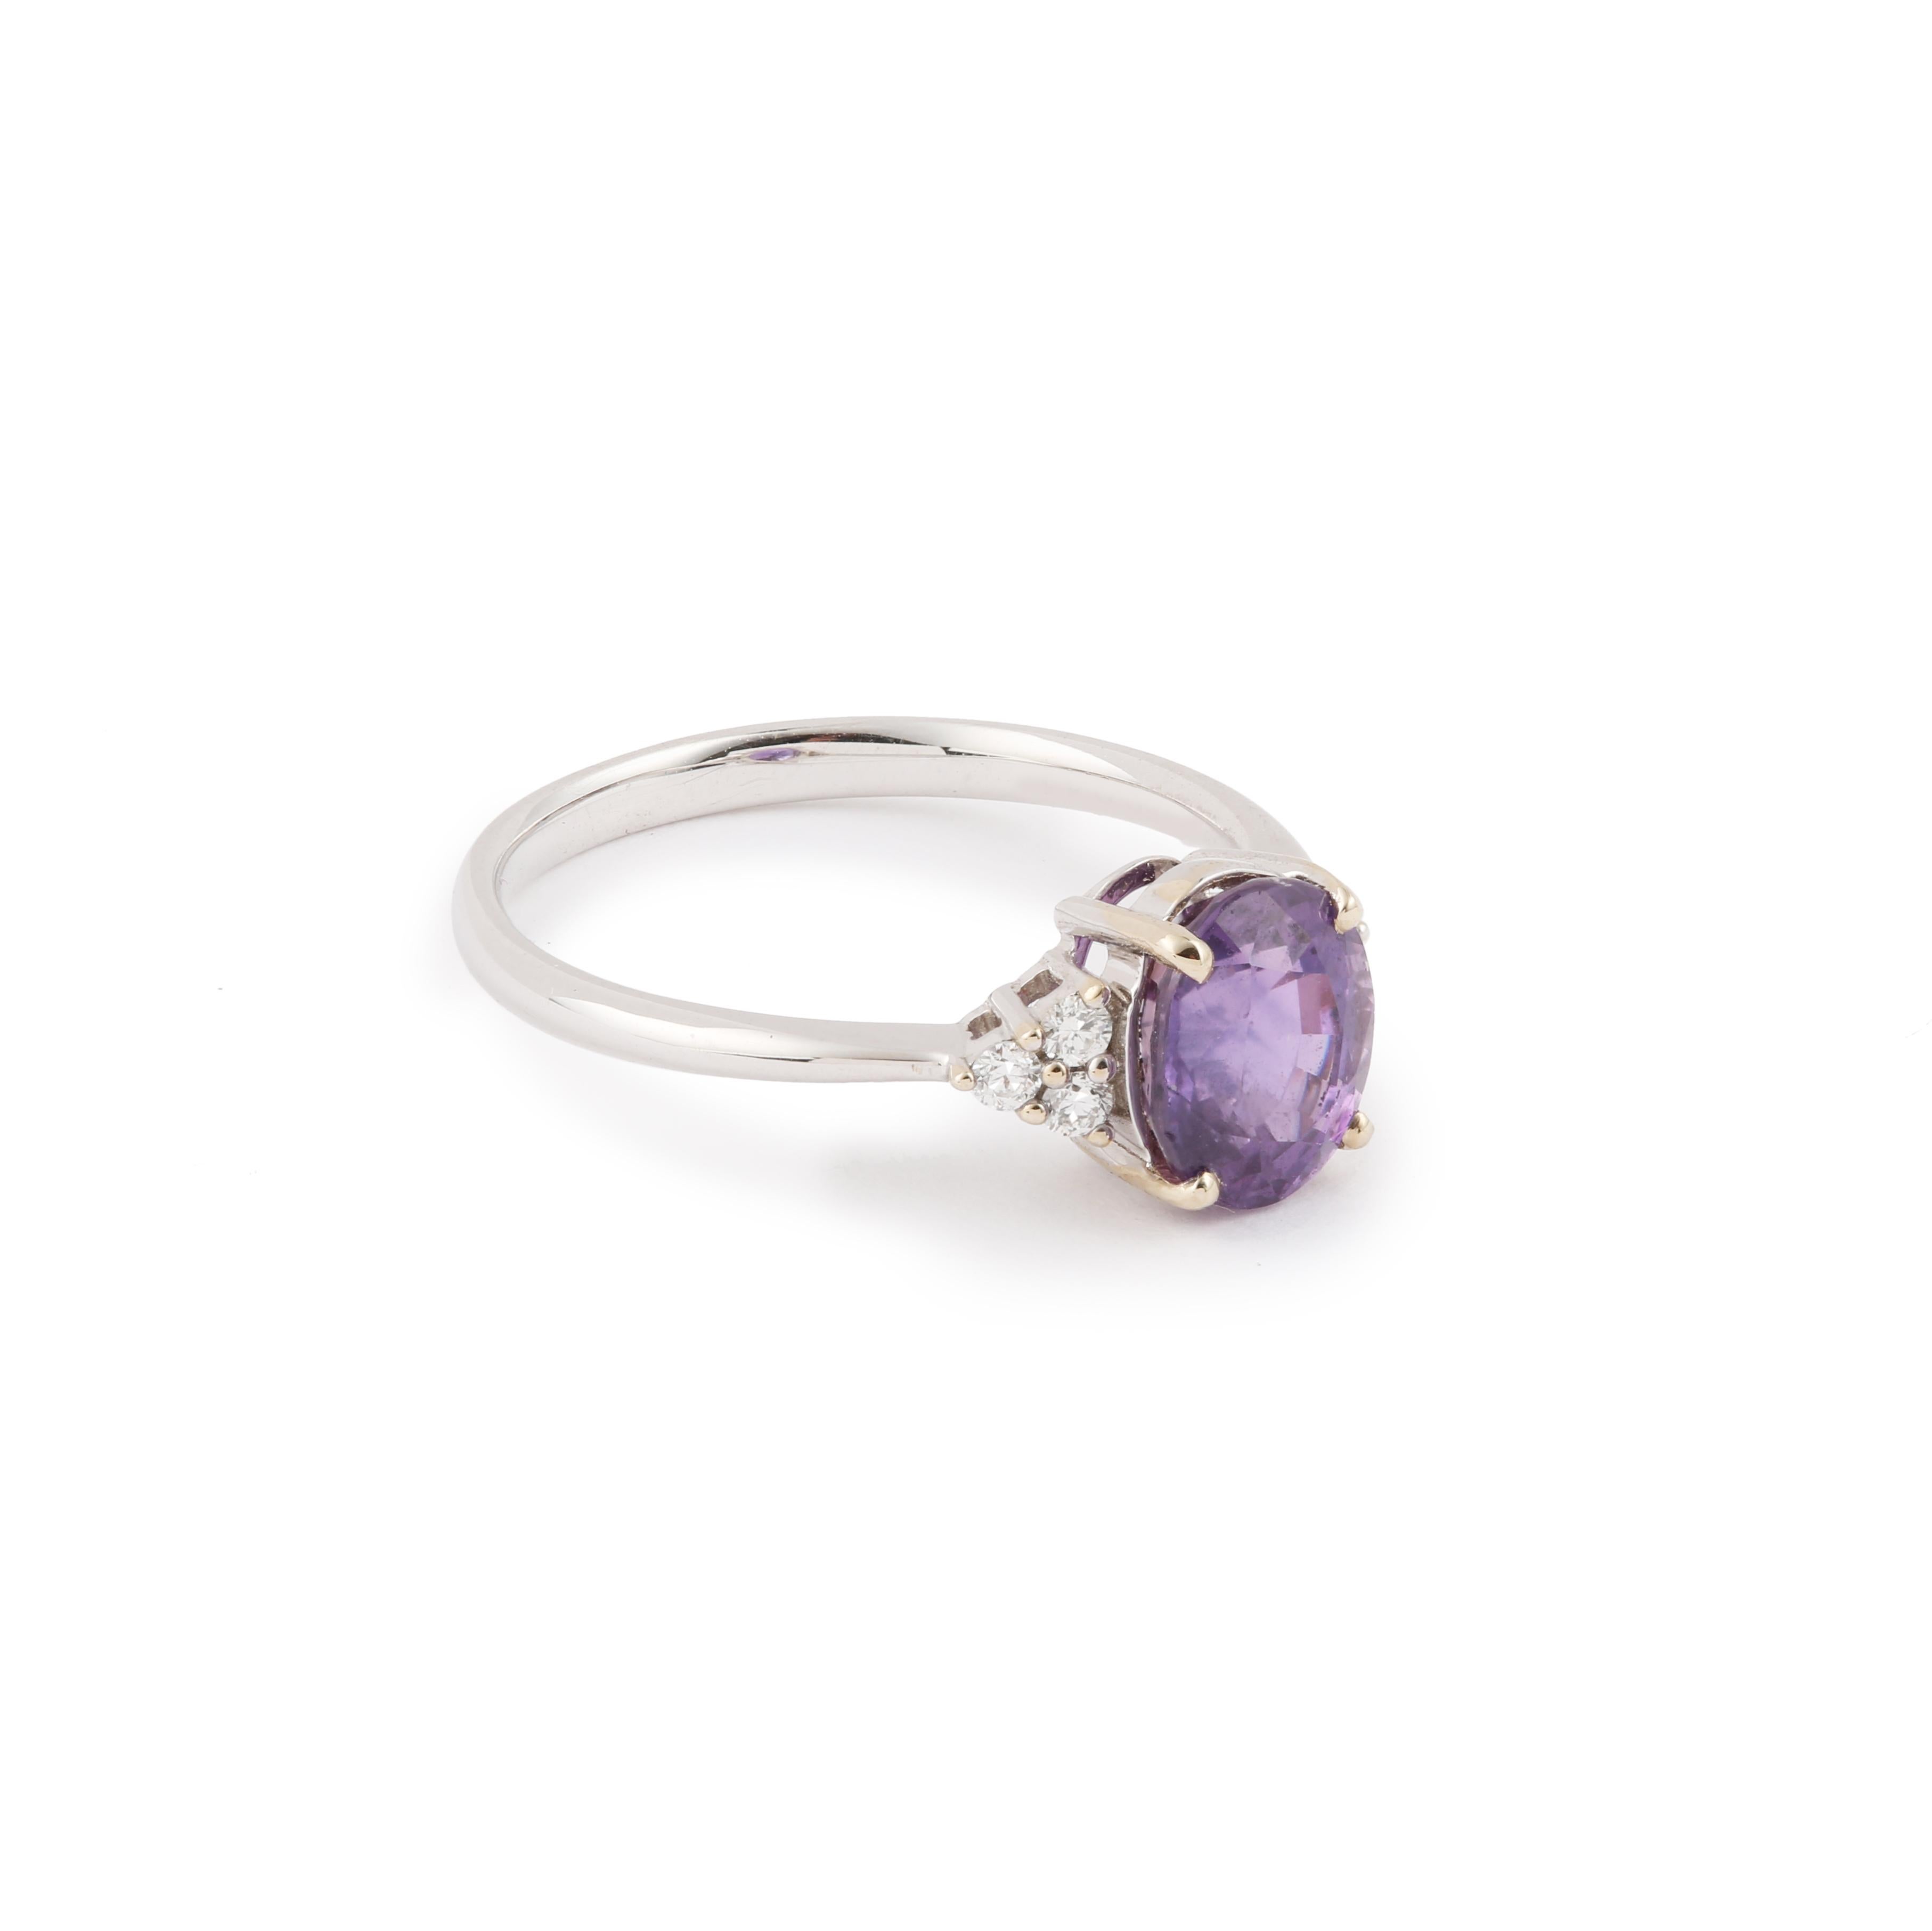 White gold ring set with an oval-cut purple sapphire and shouldered with diamonds.

Weight of the purple sapphire : 2.07 carats

Total weight of diamonds: 0.11 carats

Dimensions: 7.75 x 12.77 x 5.43 mm (0.305 x 0.502 x 0.214 inch)

Finger size : 53